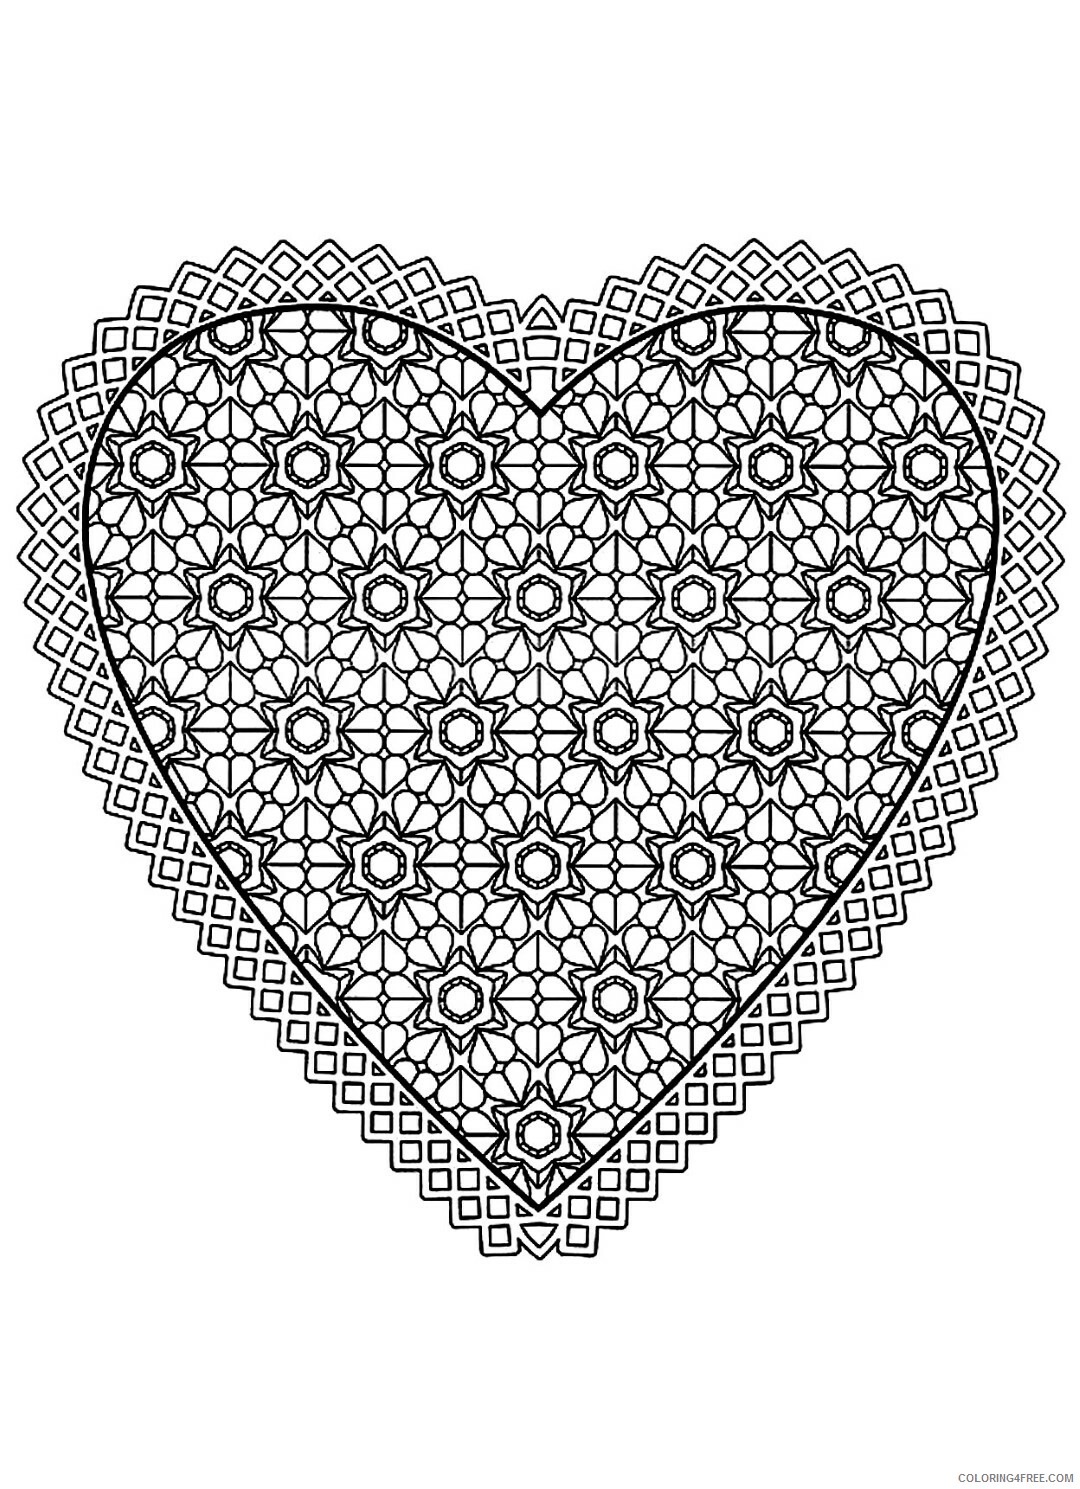 Adult Heart Coloring Pages Hearts Pattern for Adults Printable 2021 0070 Coloring4free